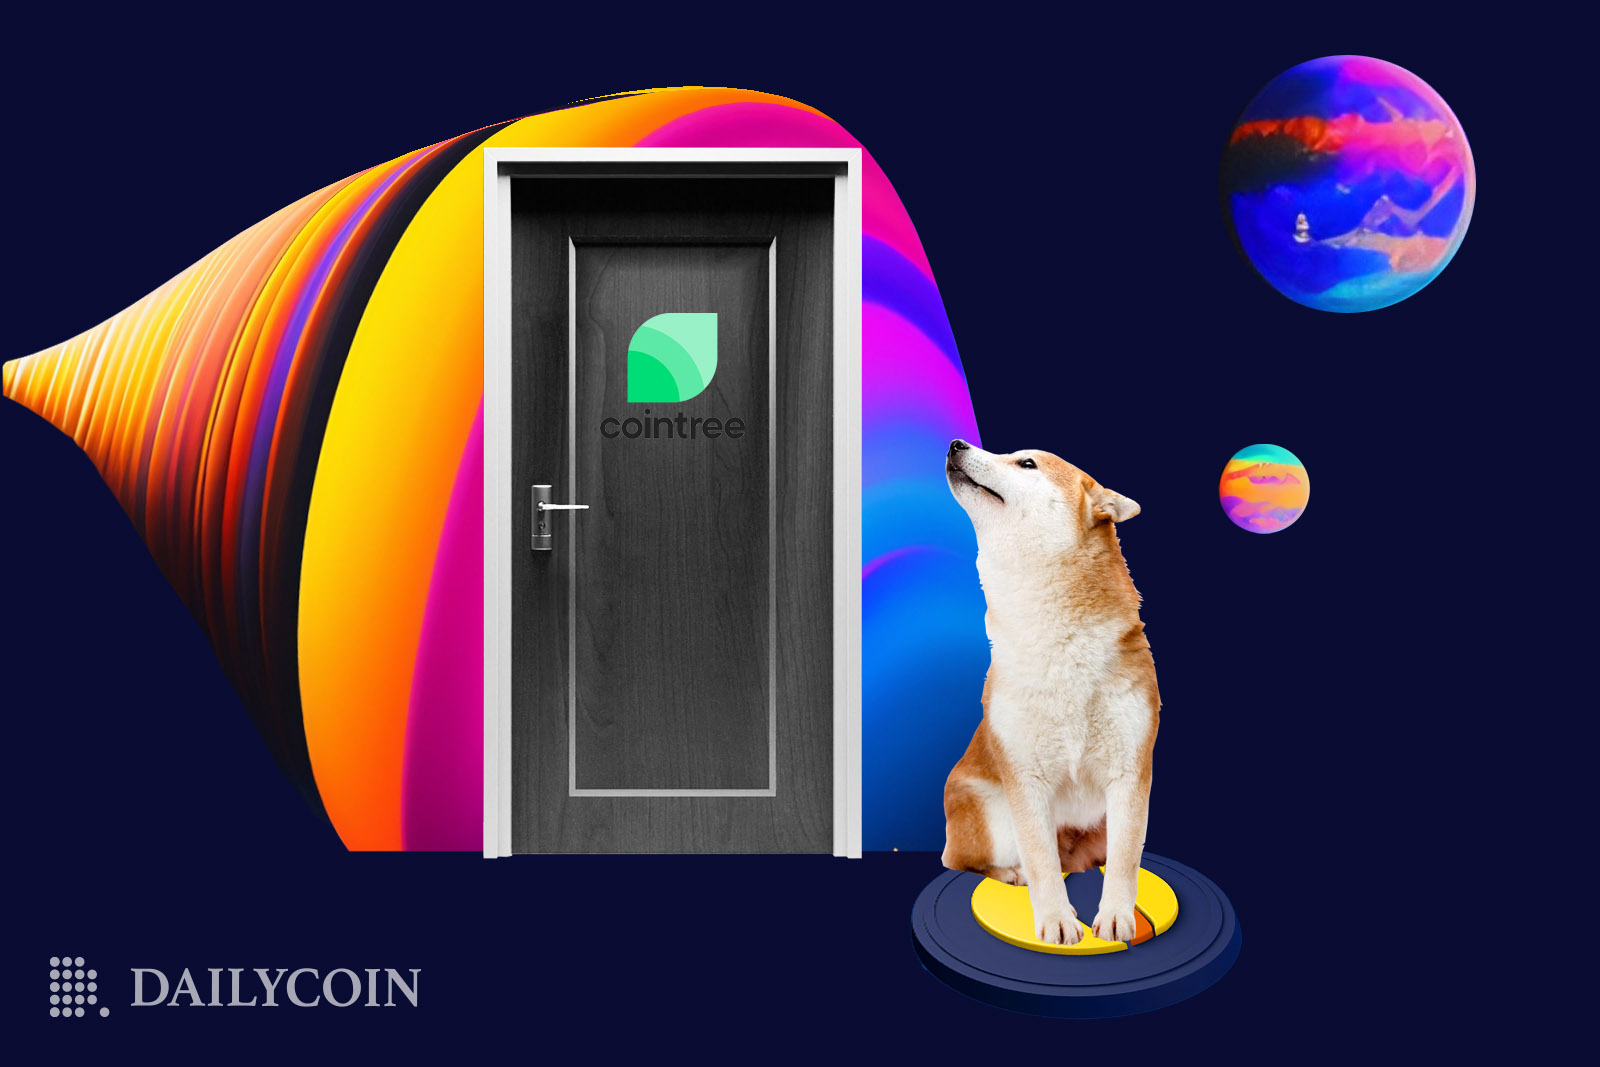 Shiba Inu shib in space looking at a black door wanting to get in.